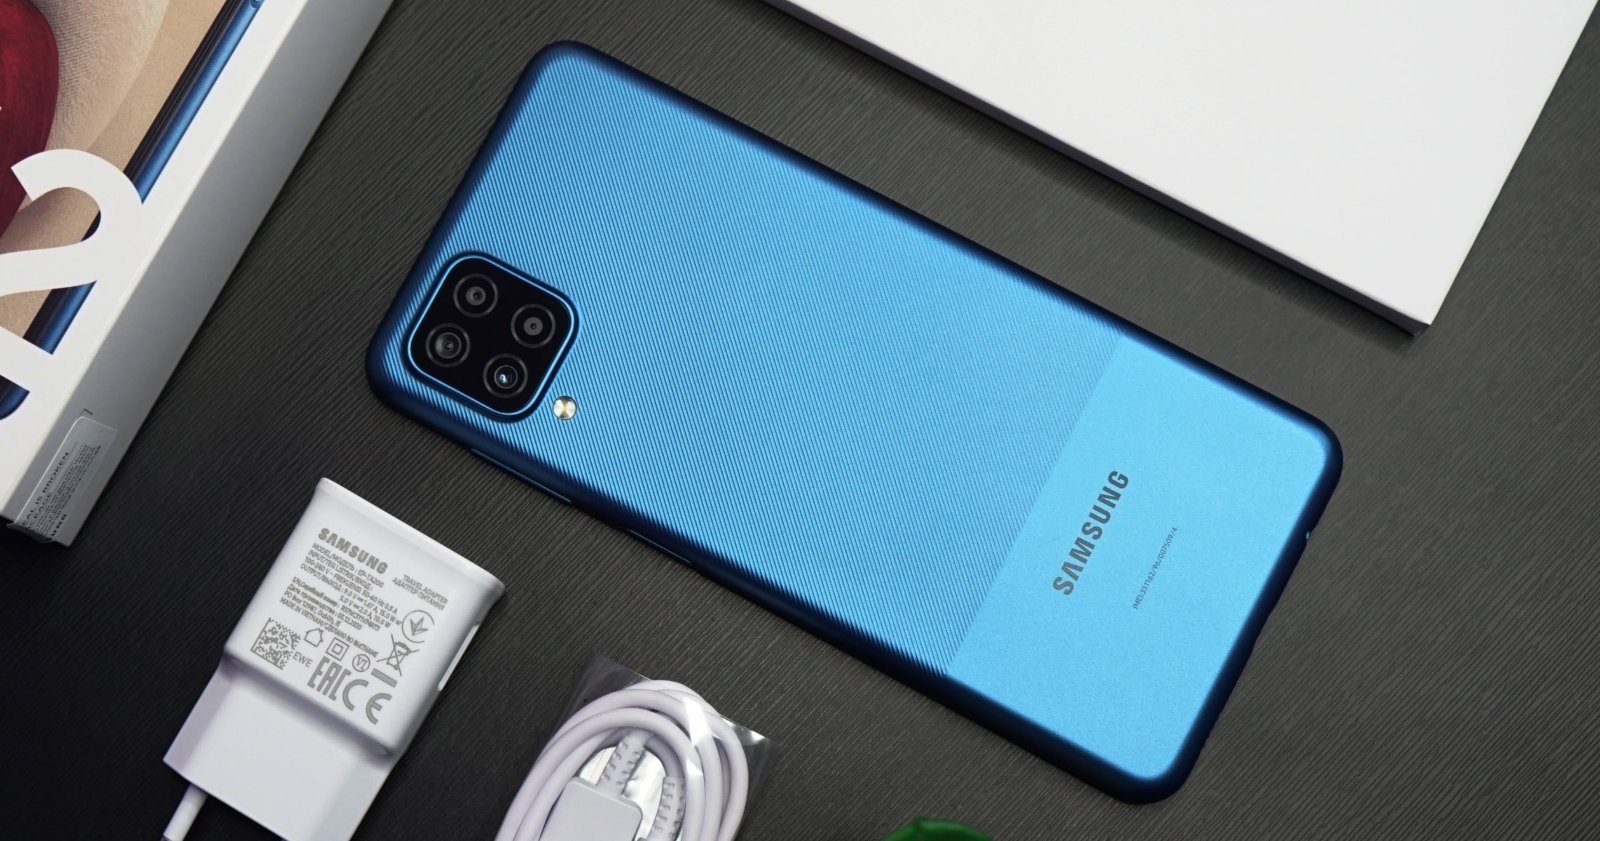 The back of the Samsung Galaxy A12